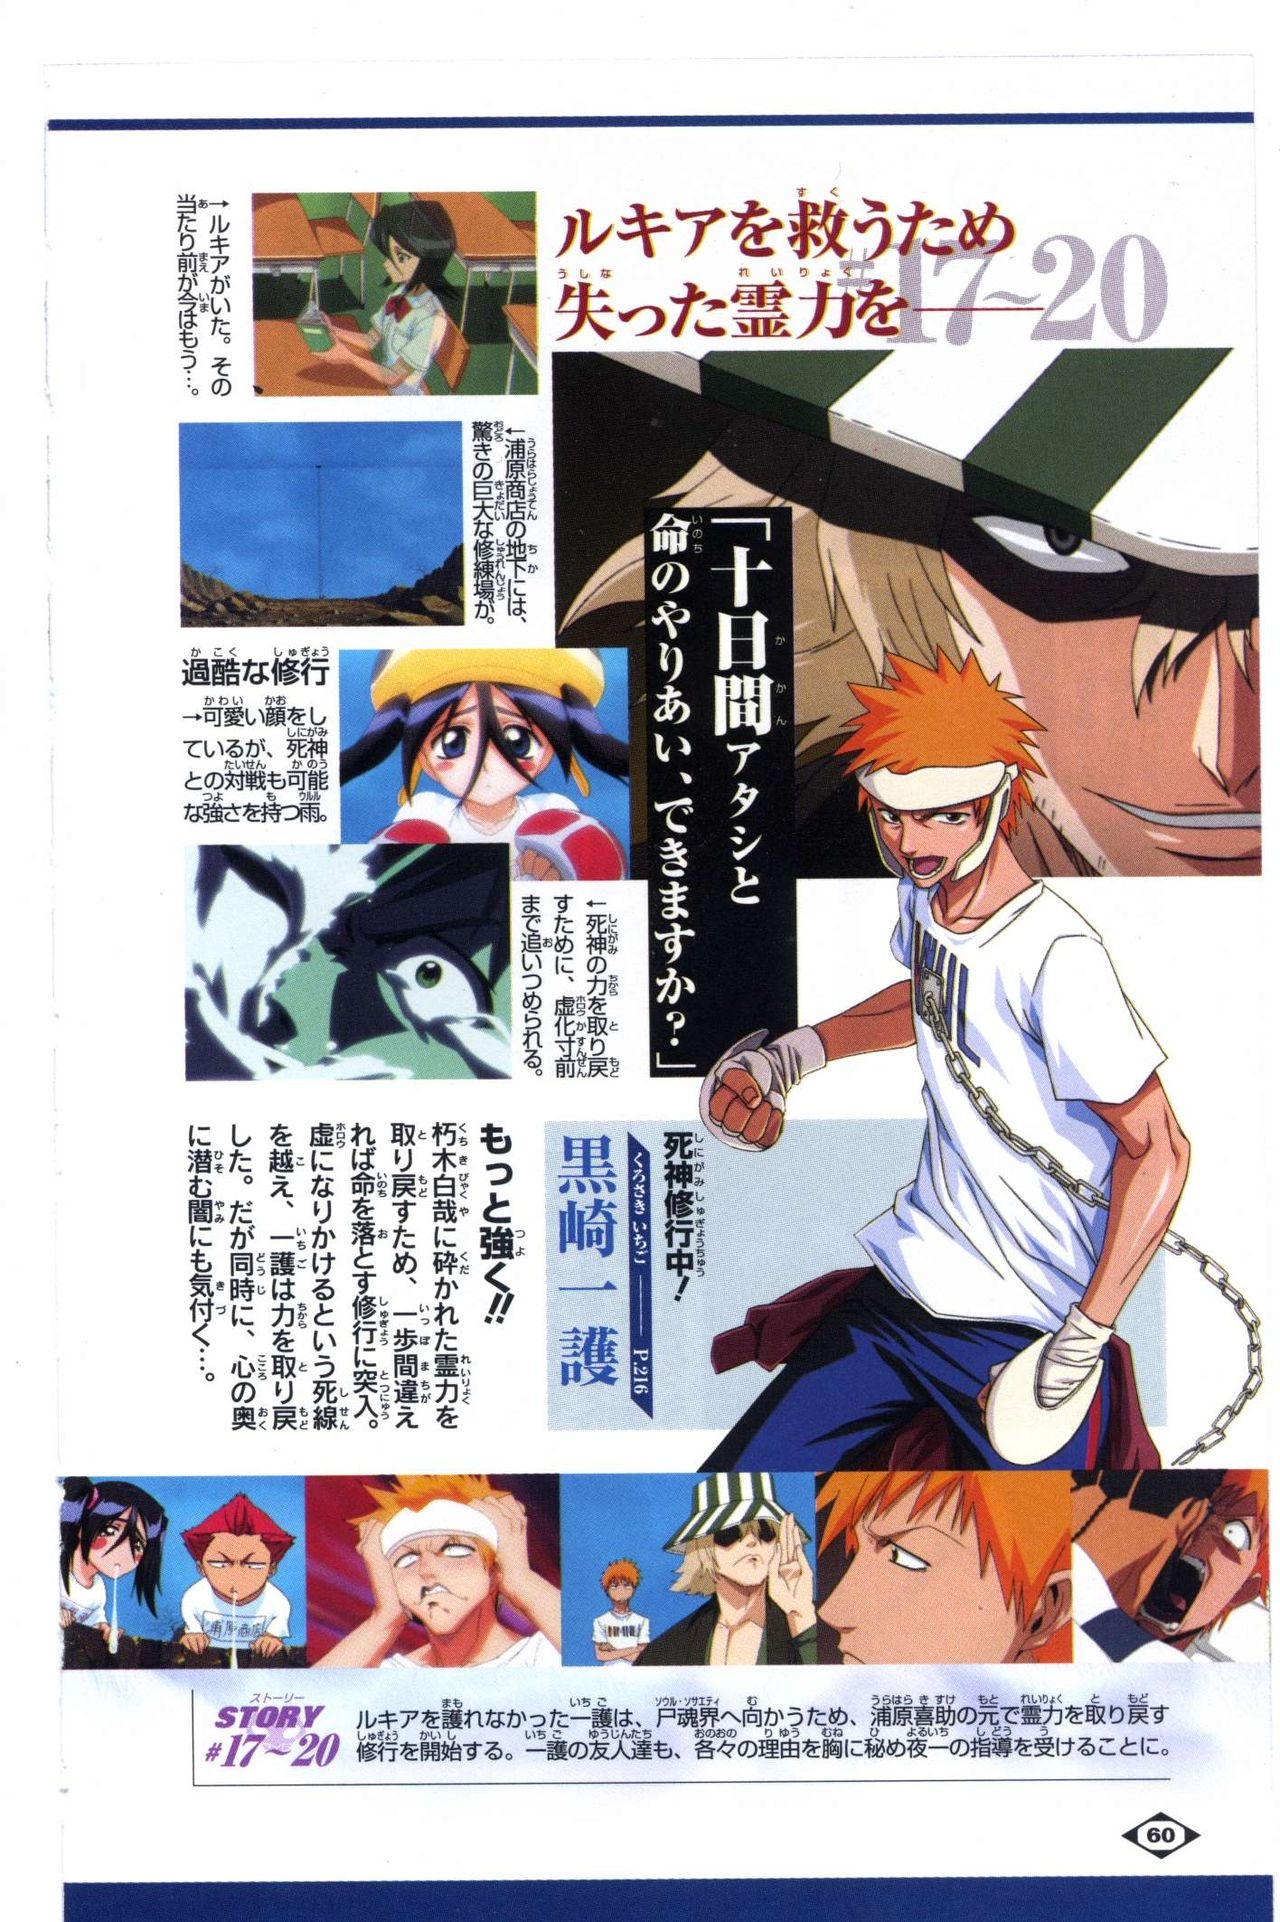 Bleach: Official Animation Book VIBEs 60